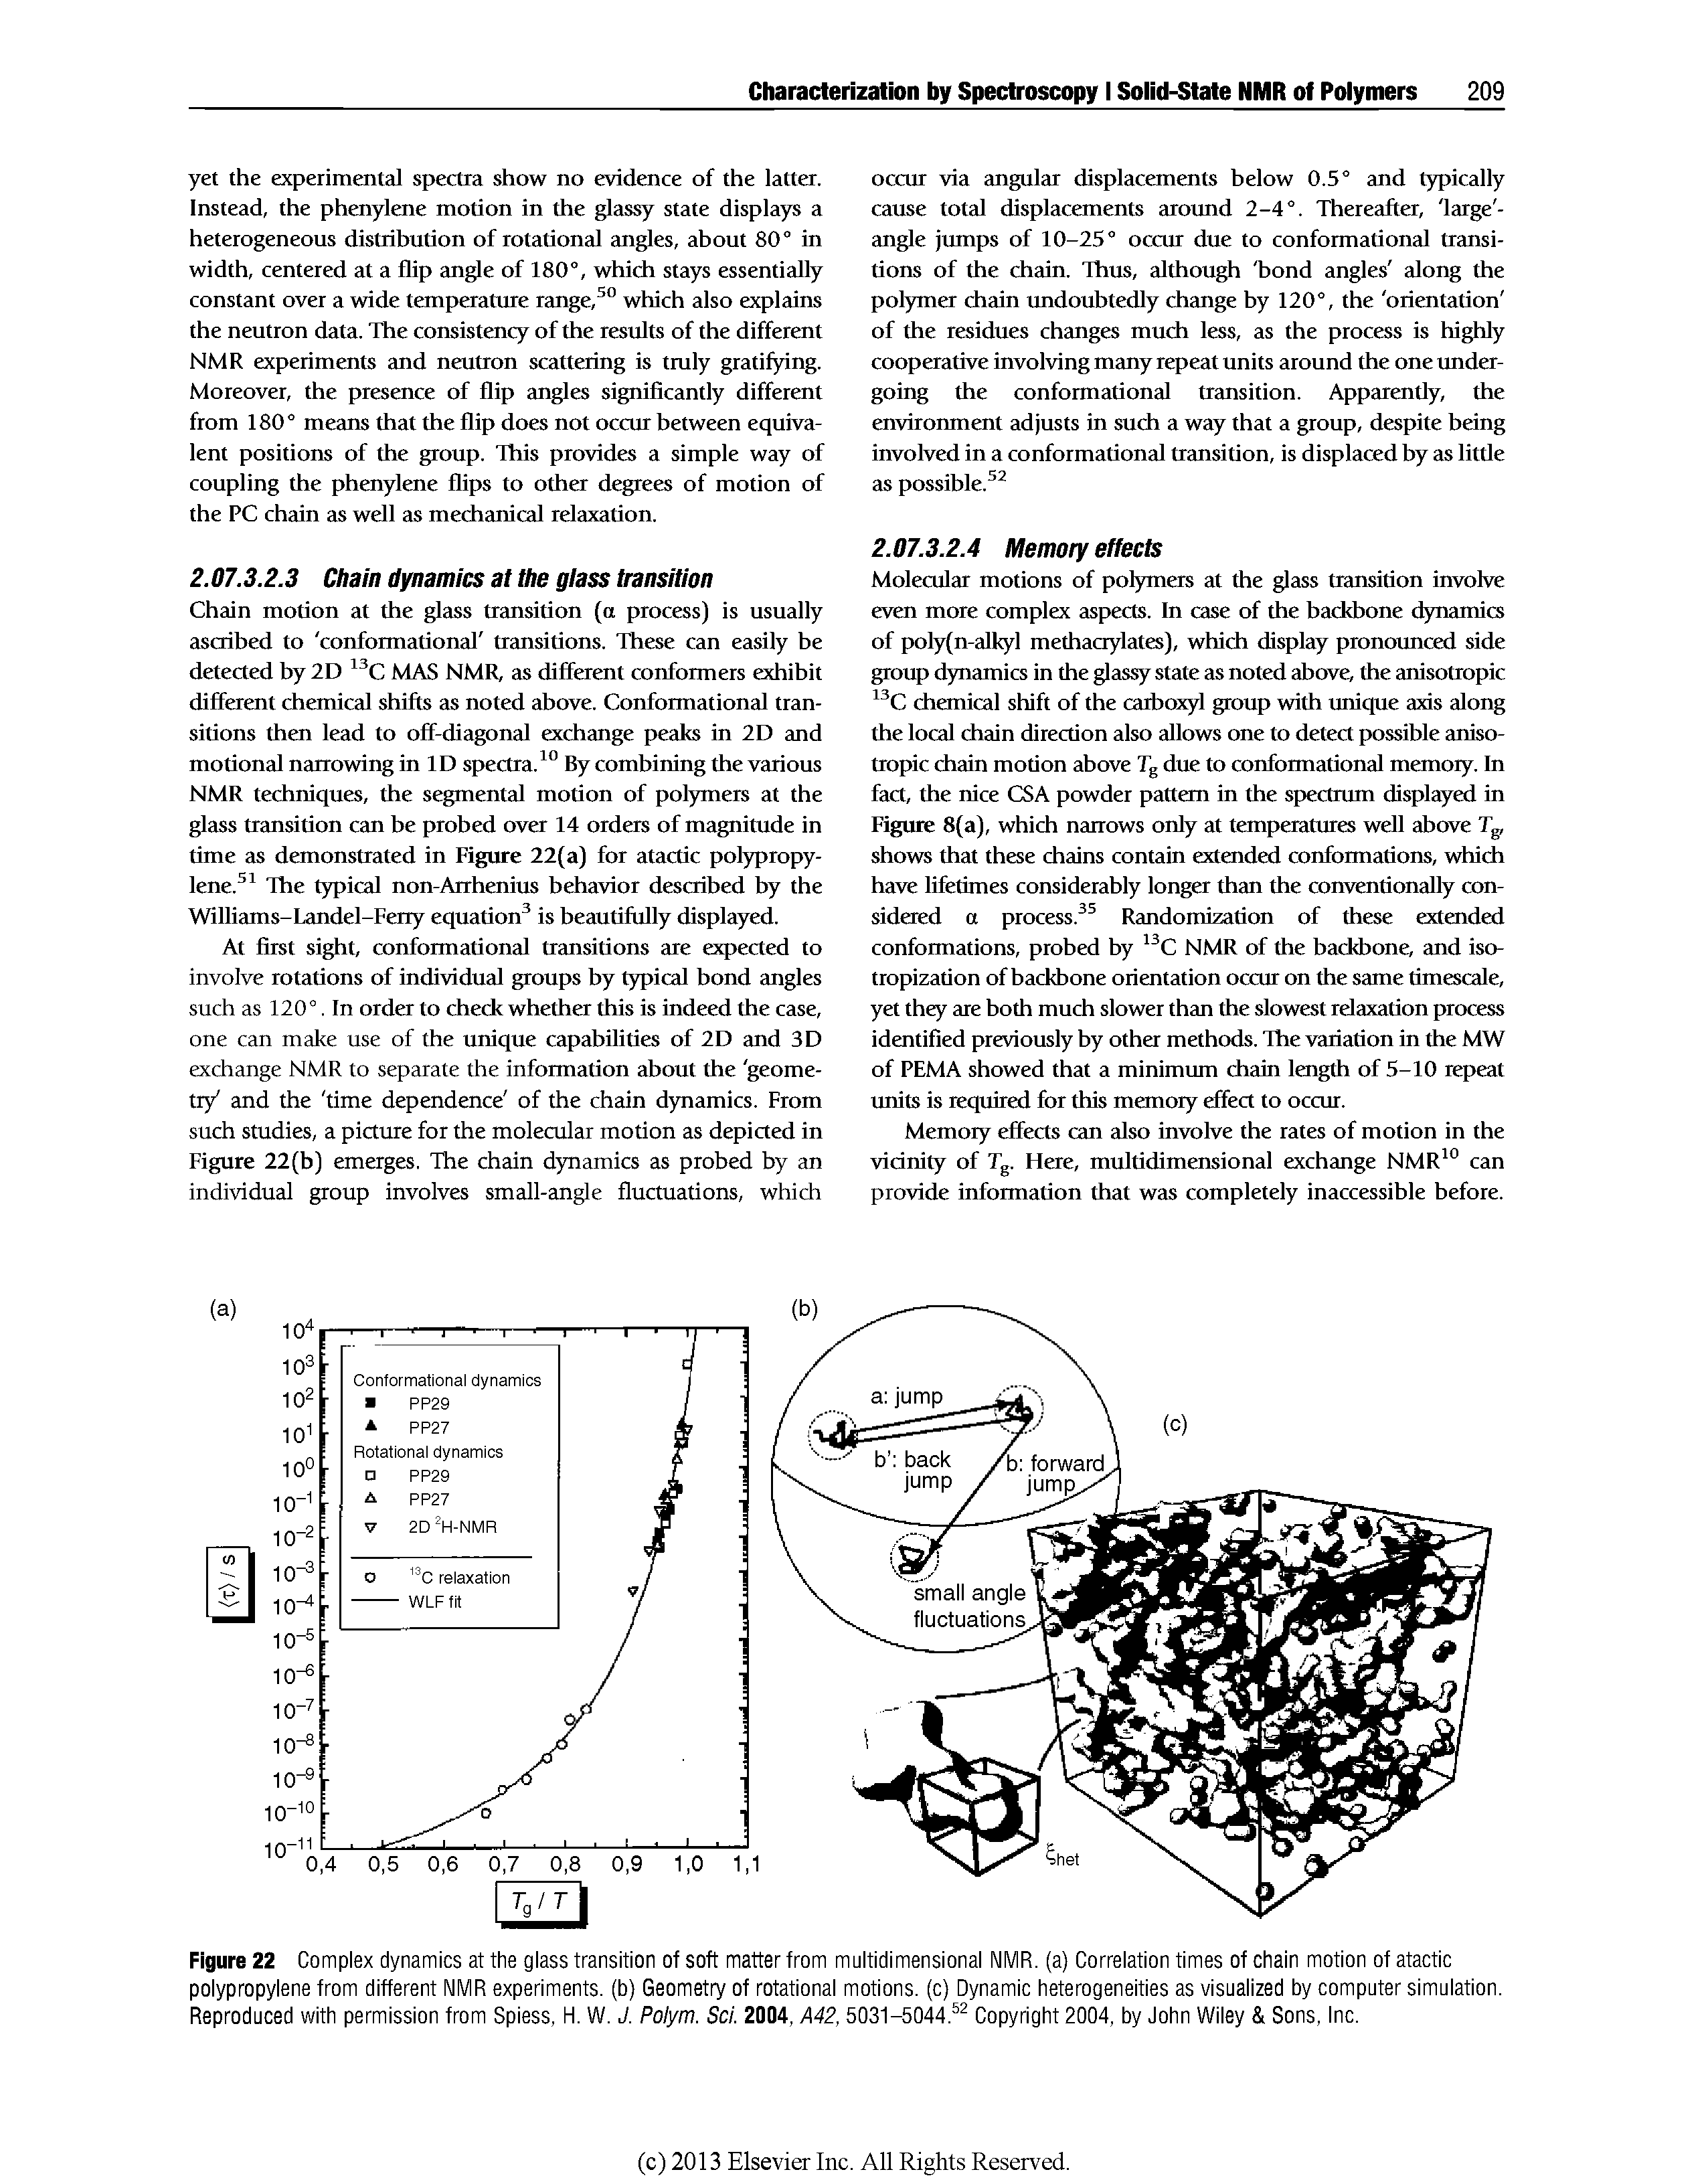 Figure 22 Complex dynamics at the glass transition of soft matter from multidimensional NMR. (a) Correlation times of chain motion of atactic polypropylene from different NMR experiments, (b) Geometry of rotational motions, (c) Dynamic heterogeneities as visualized by computer simulation. Reproduced with permission from Spiess, H. W. J. Polym. Sci. 2004, A42,5031-5044. Copyright 2004, by John Wiley Sons, Inc.